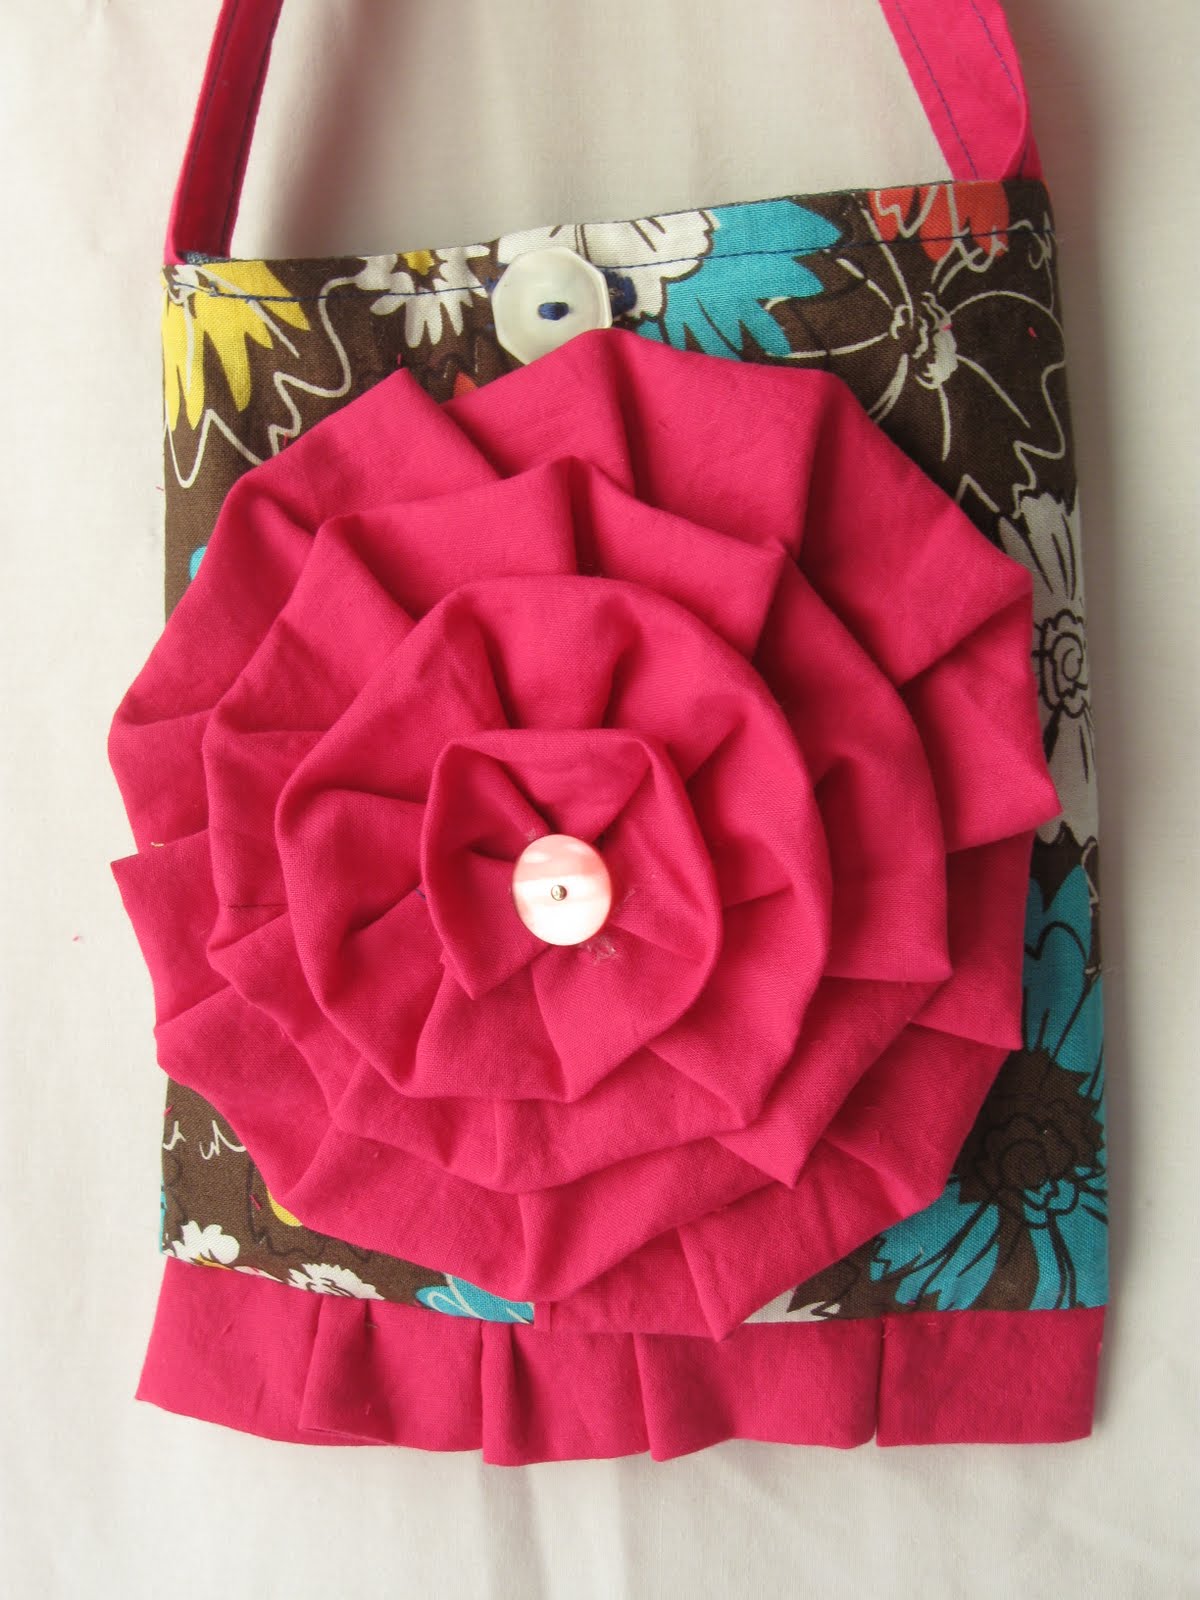 A Quiet Little Life: Today In My Craft Room Part II: Ruffle Flower Purse